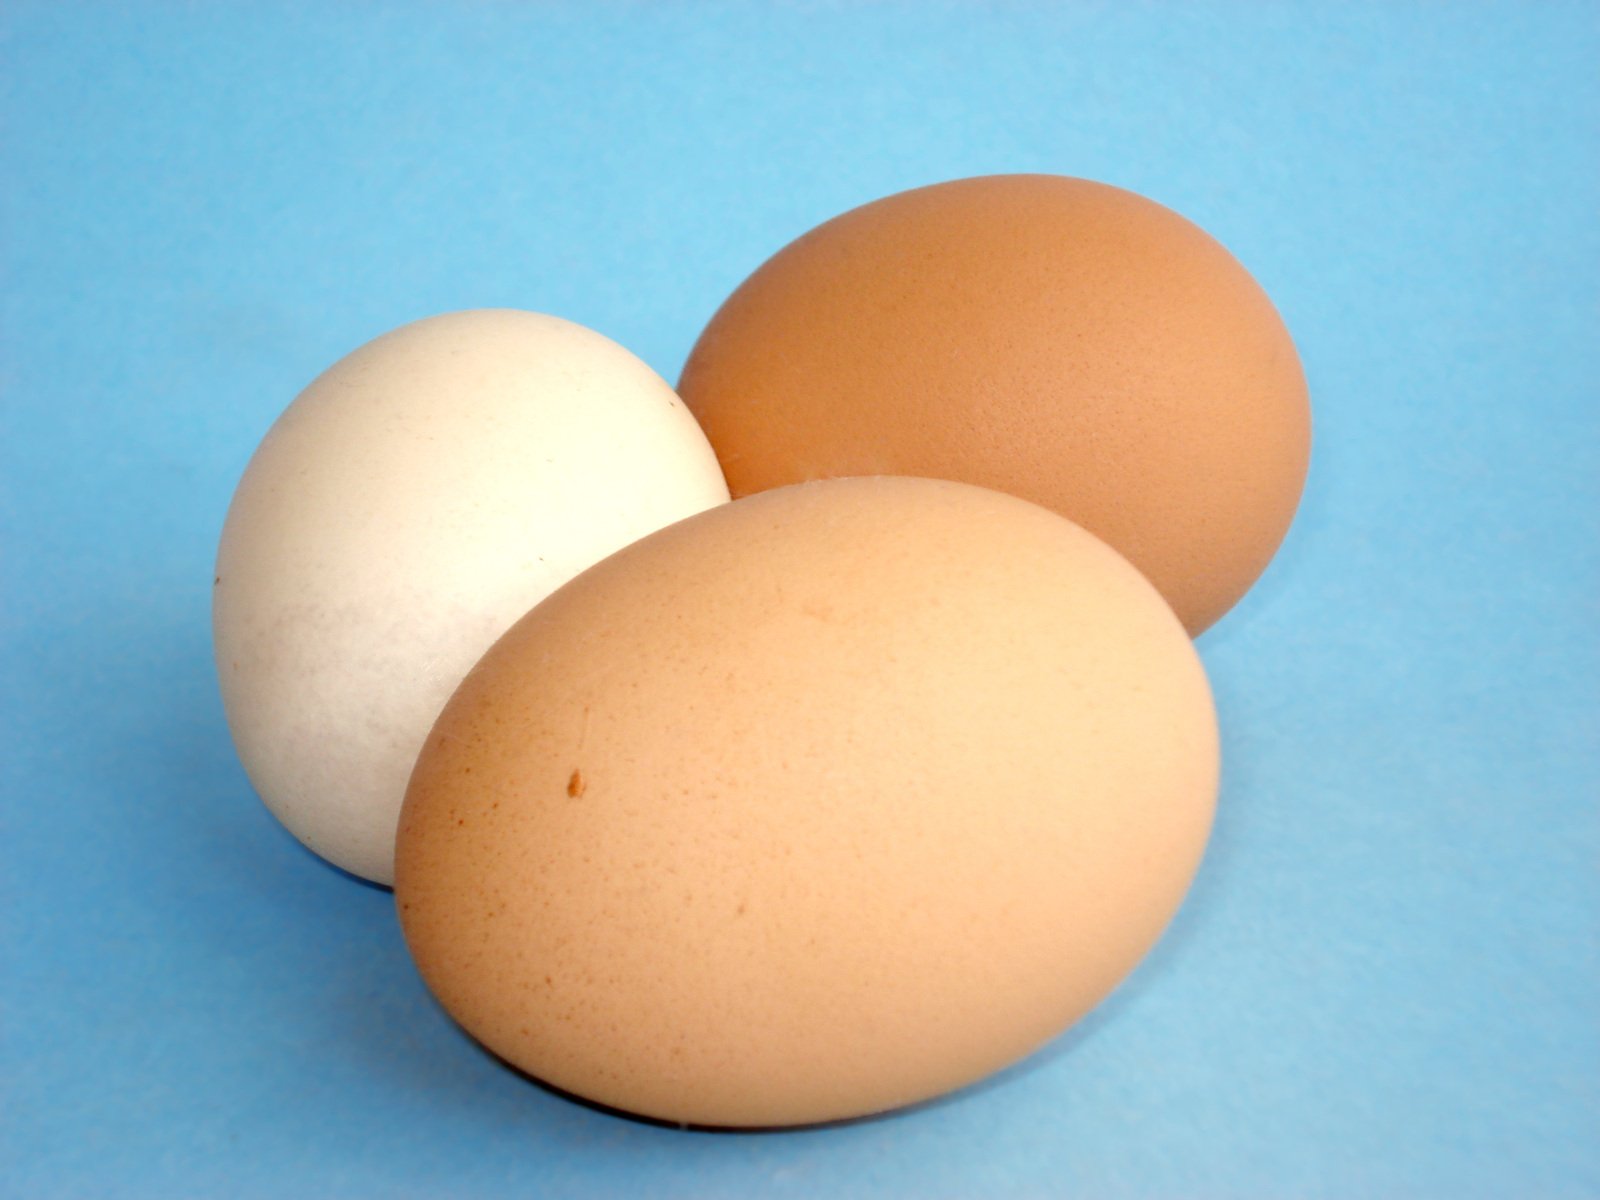 three eggs sitting in the middle of a blue background